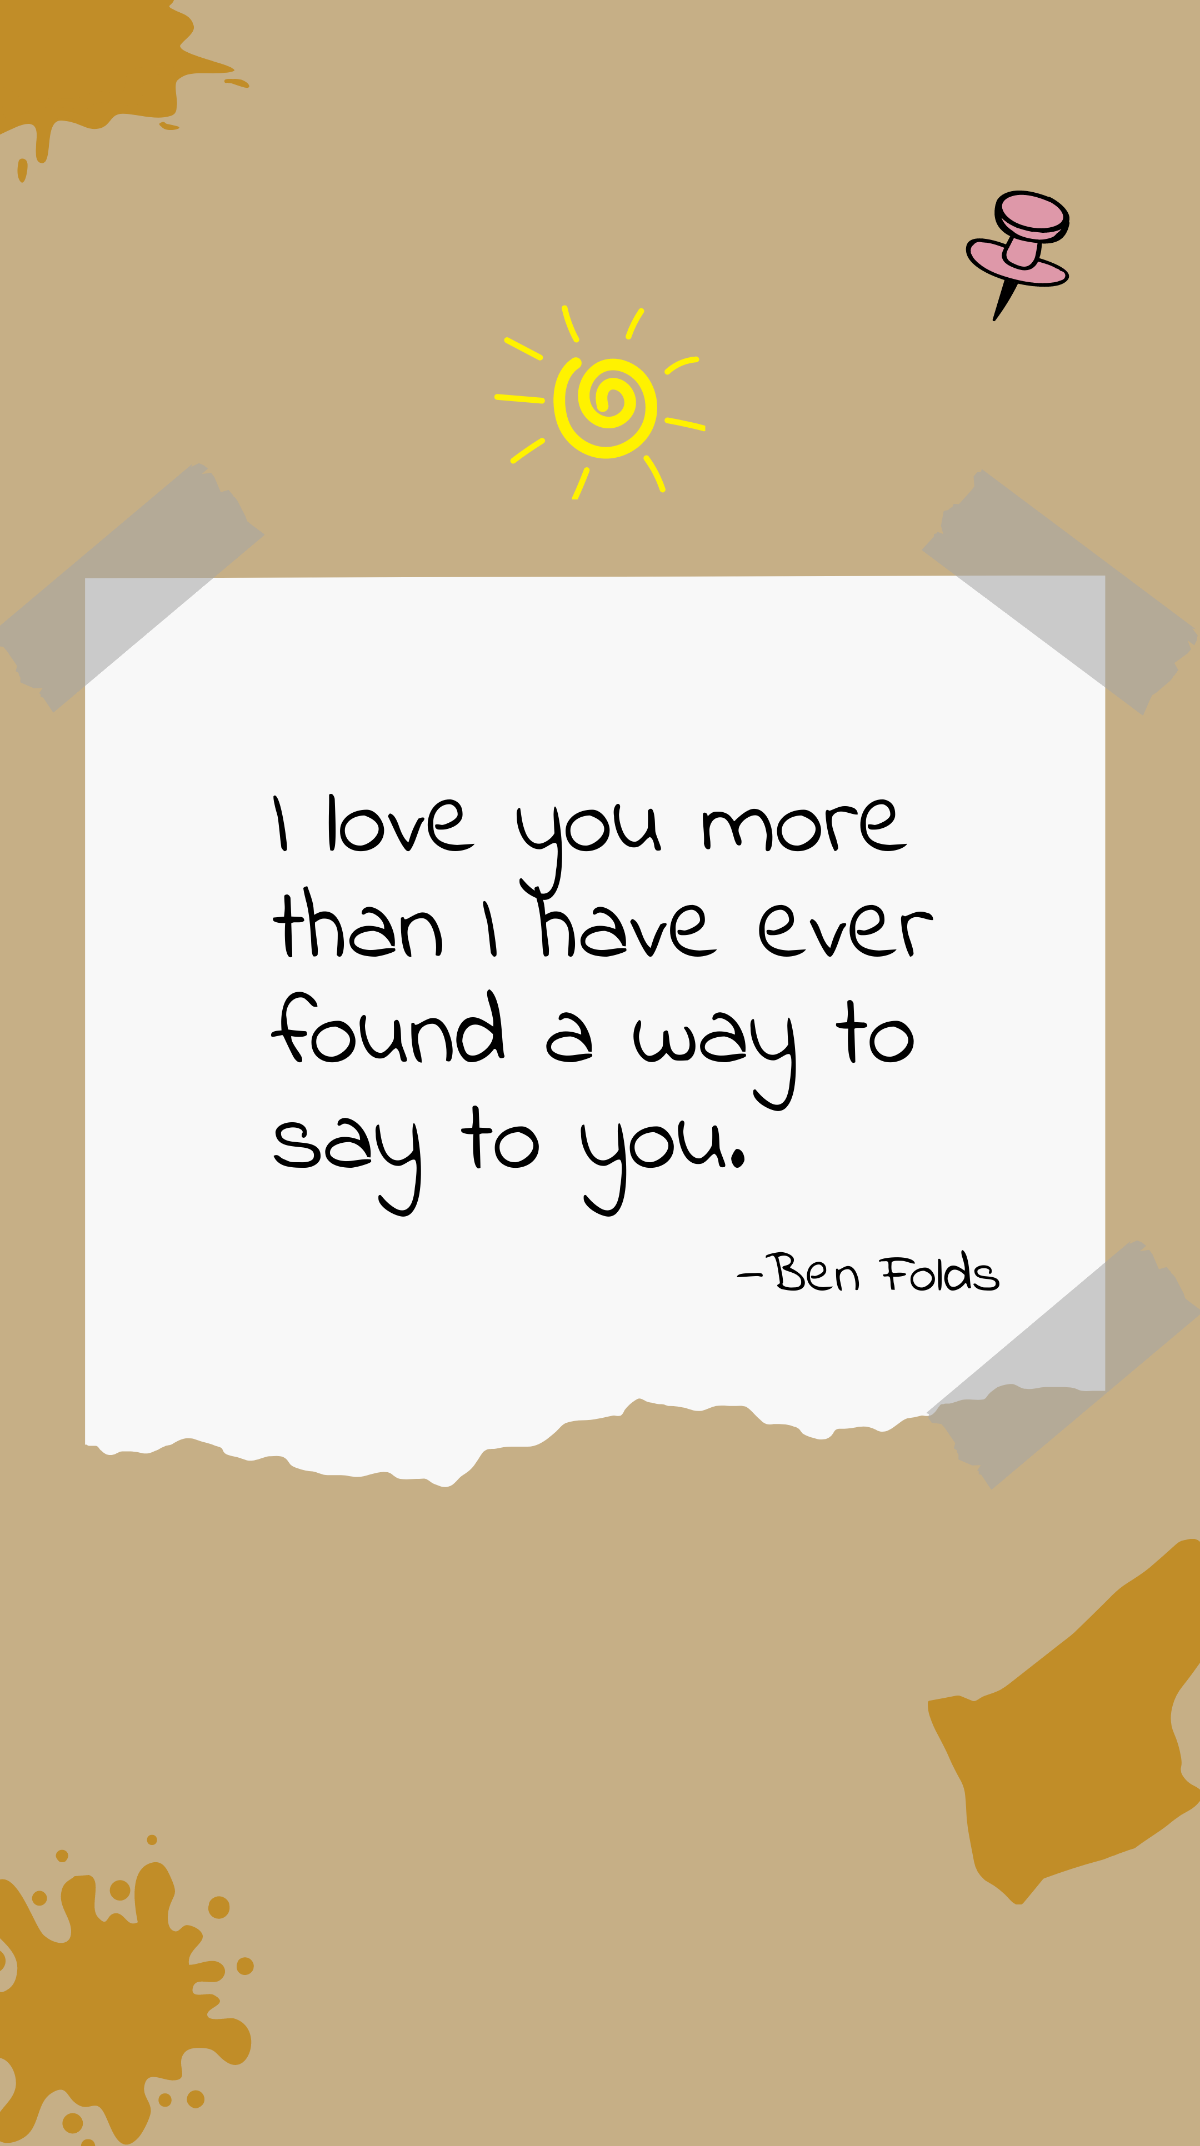 Ben Folds - “I love you more than I have ever found a way to say to you.” Template